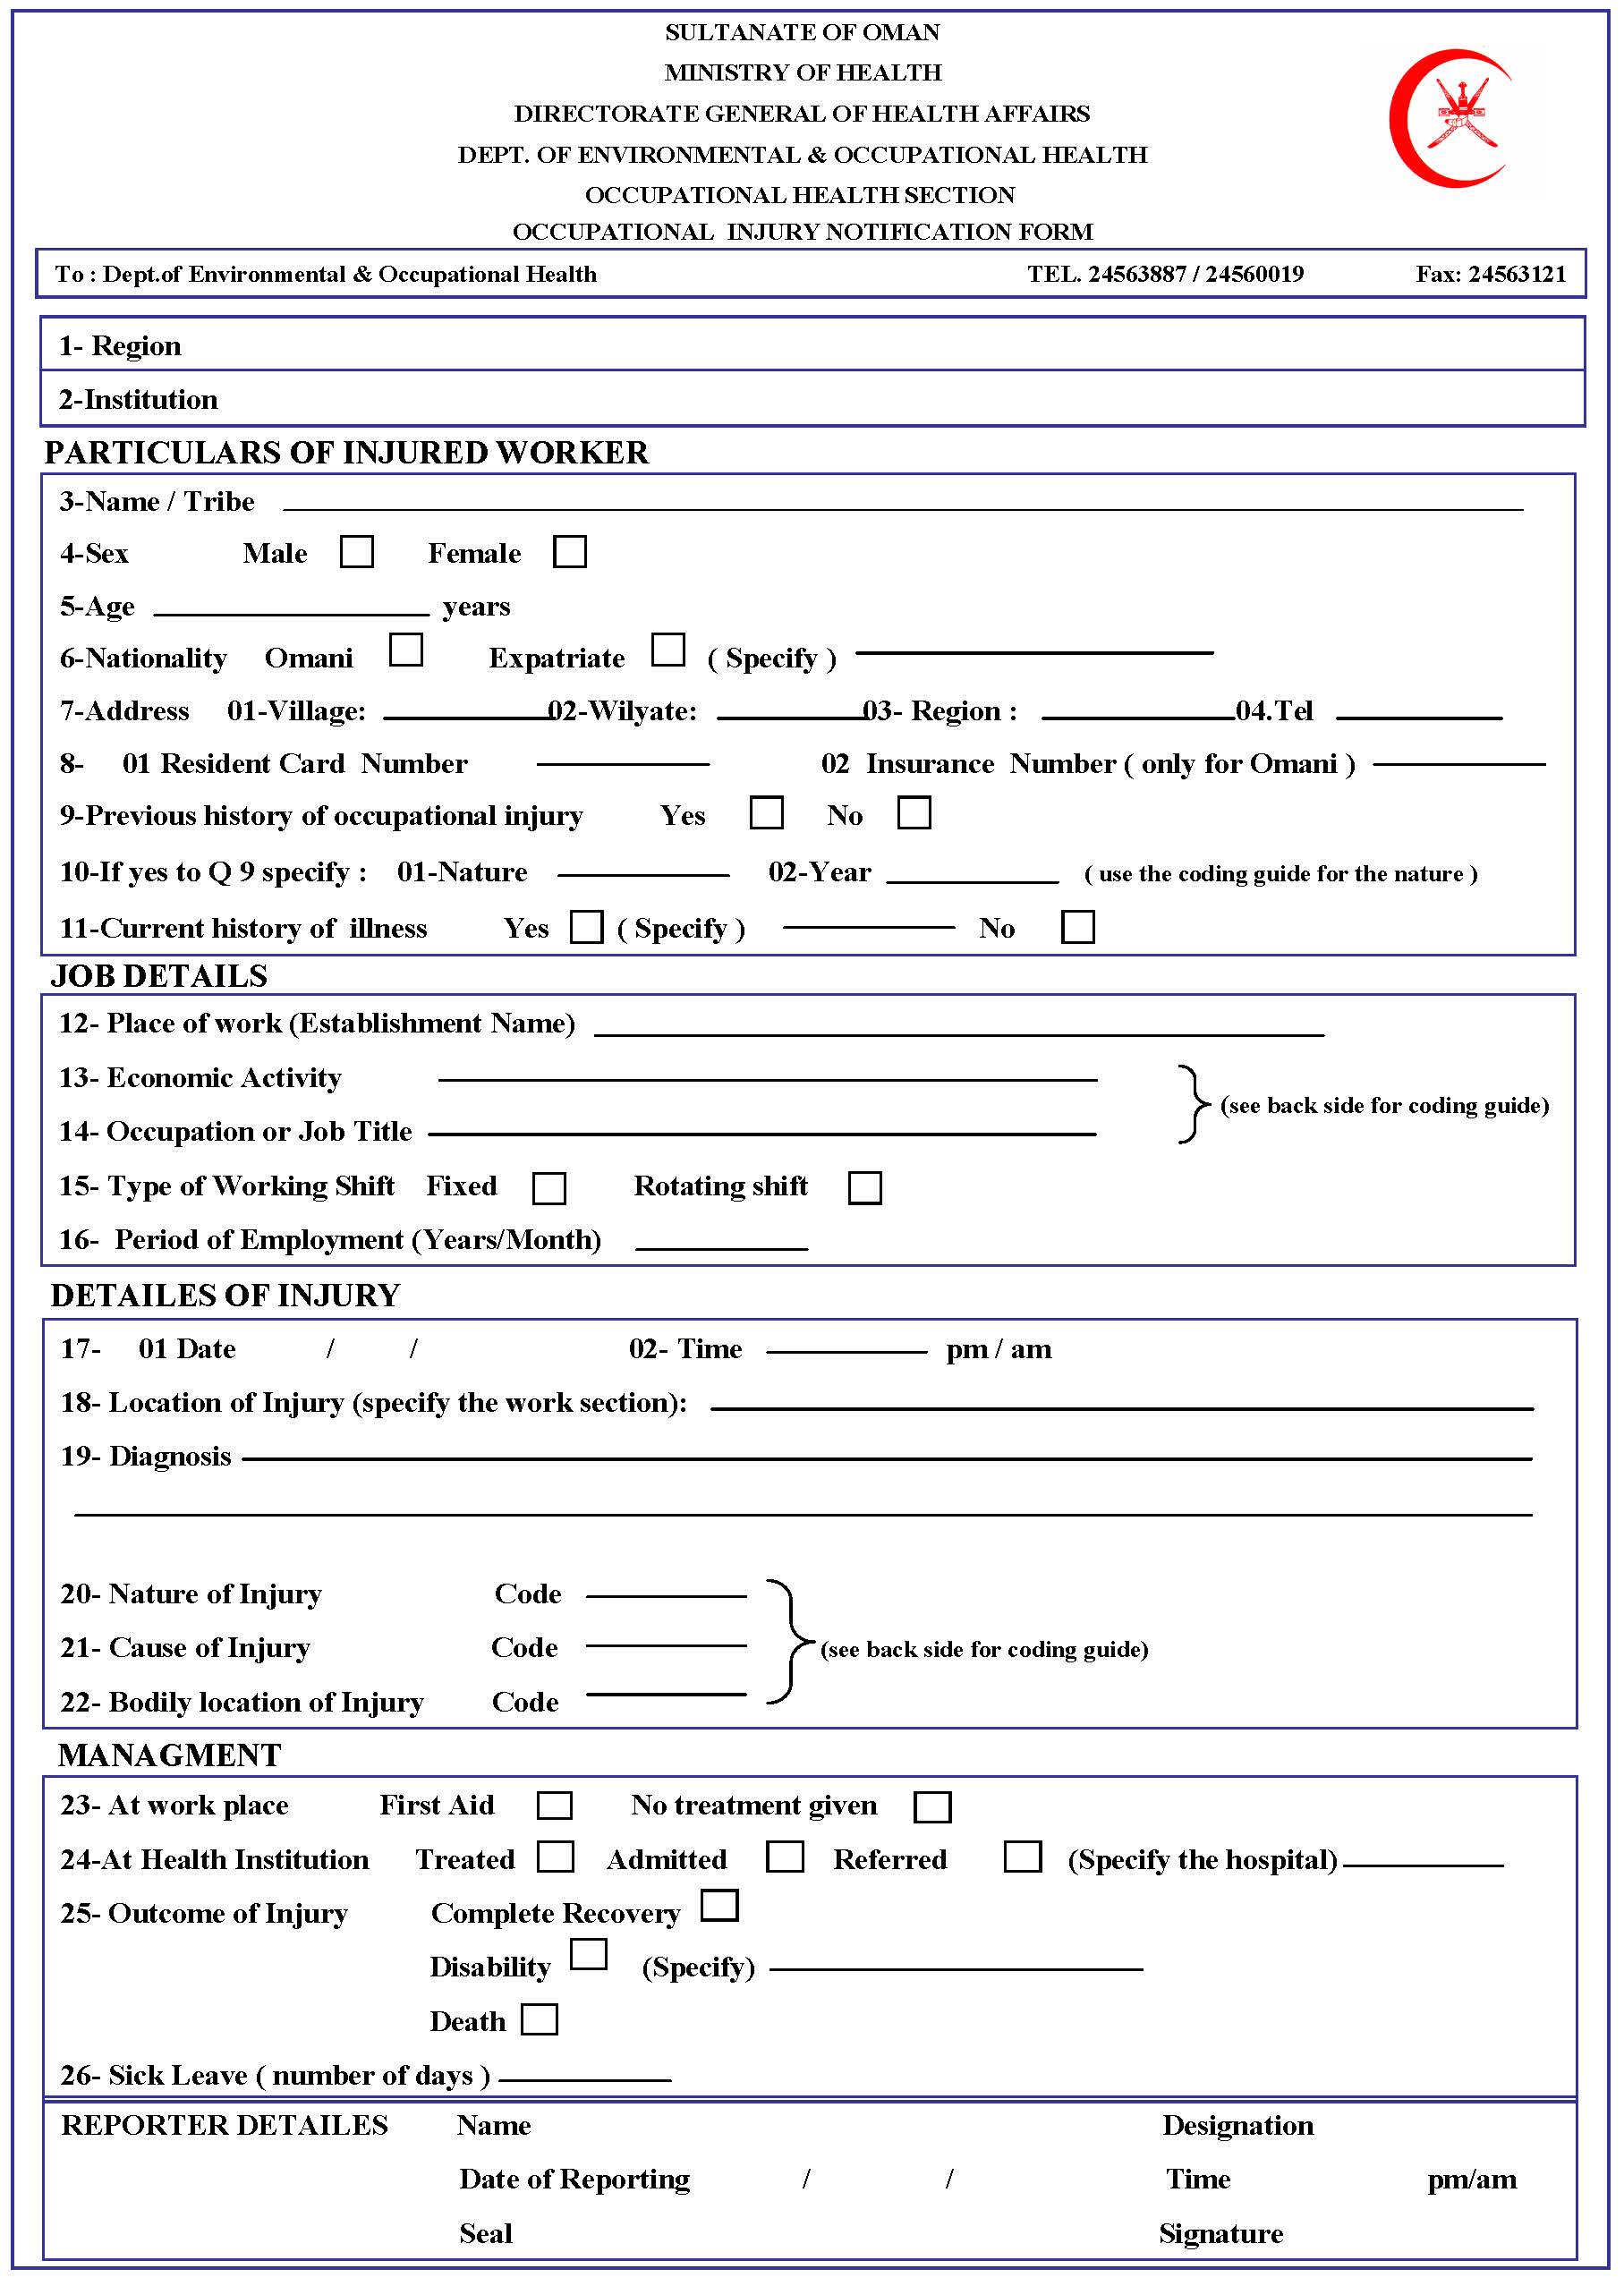 F-76-Oman-Occupational-Accident-Notification-Form